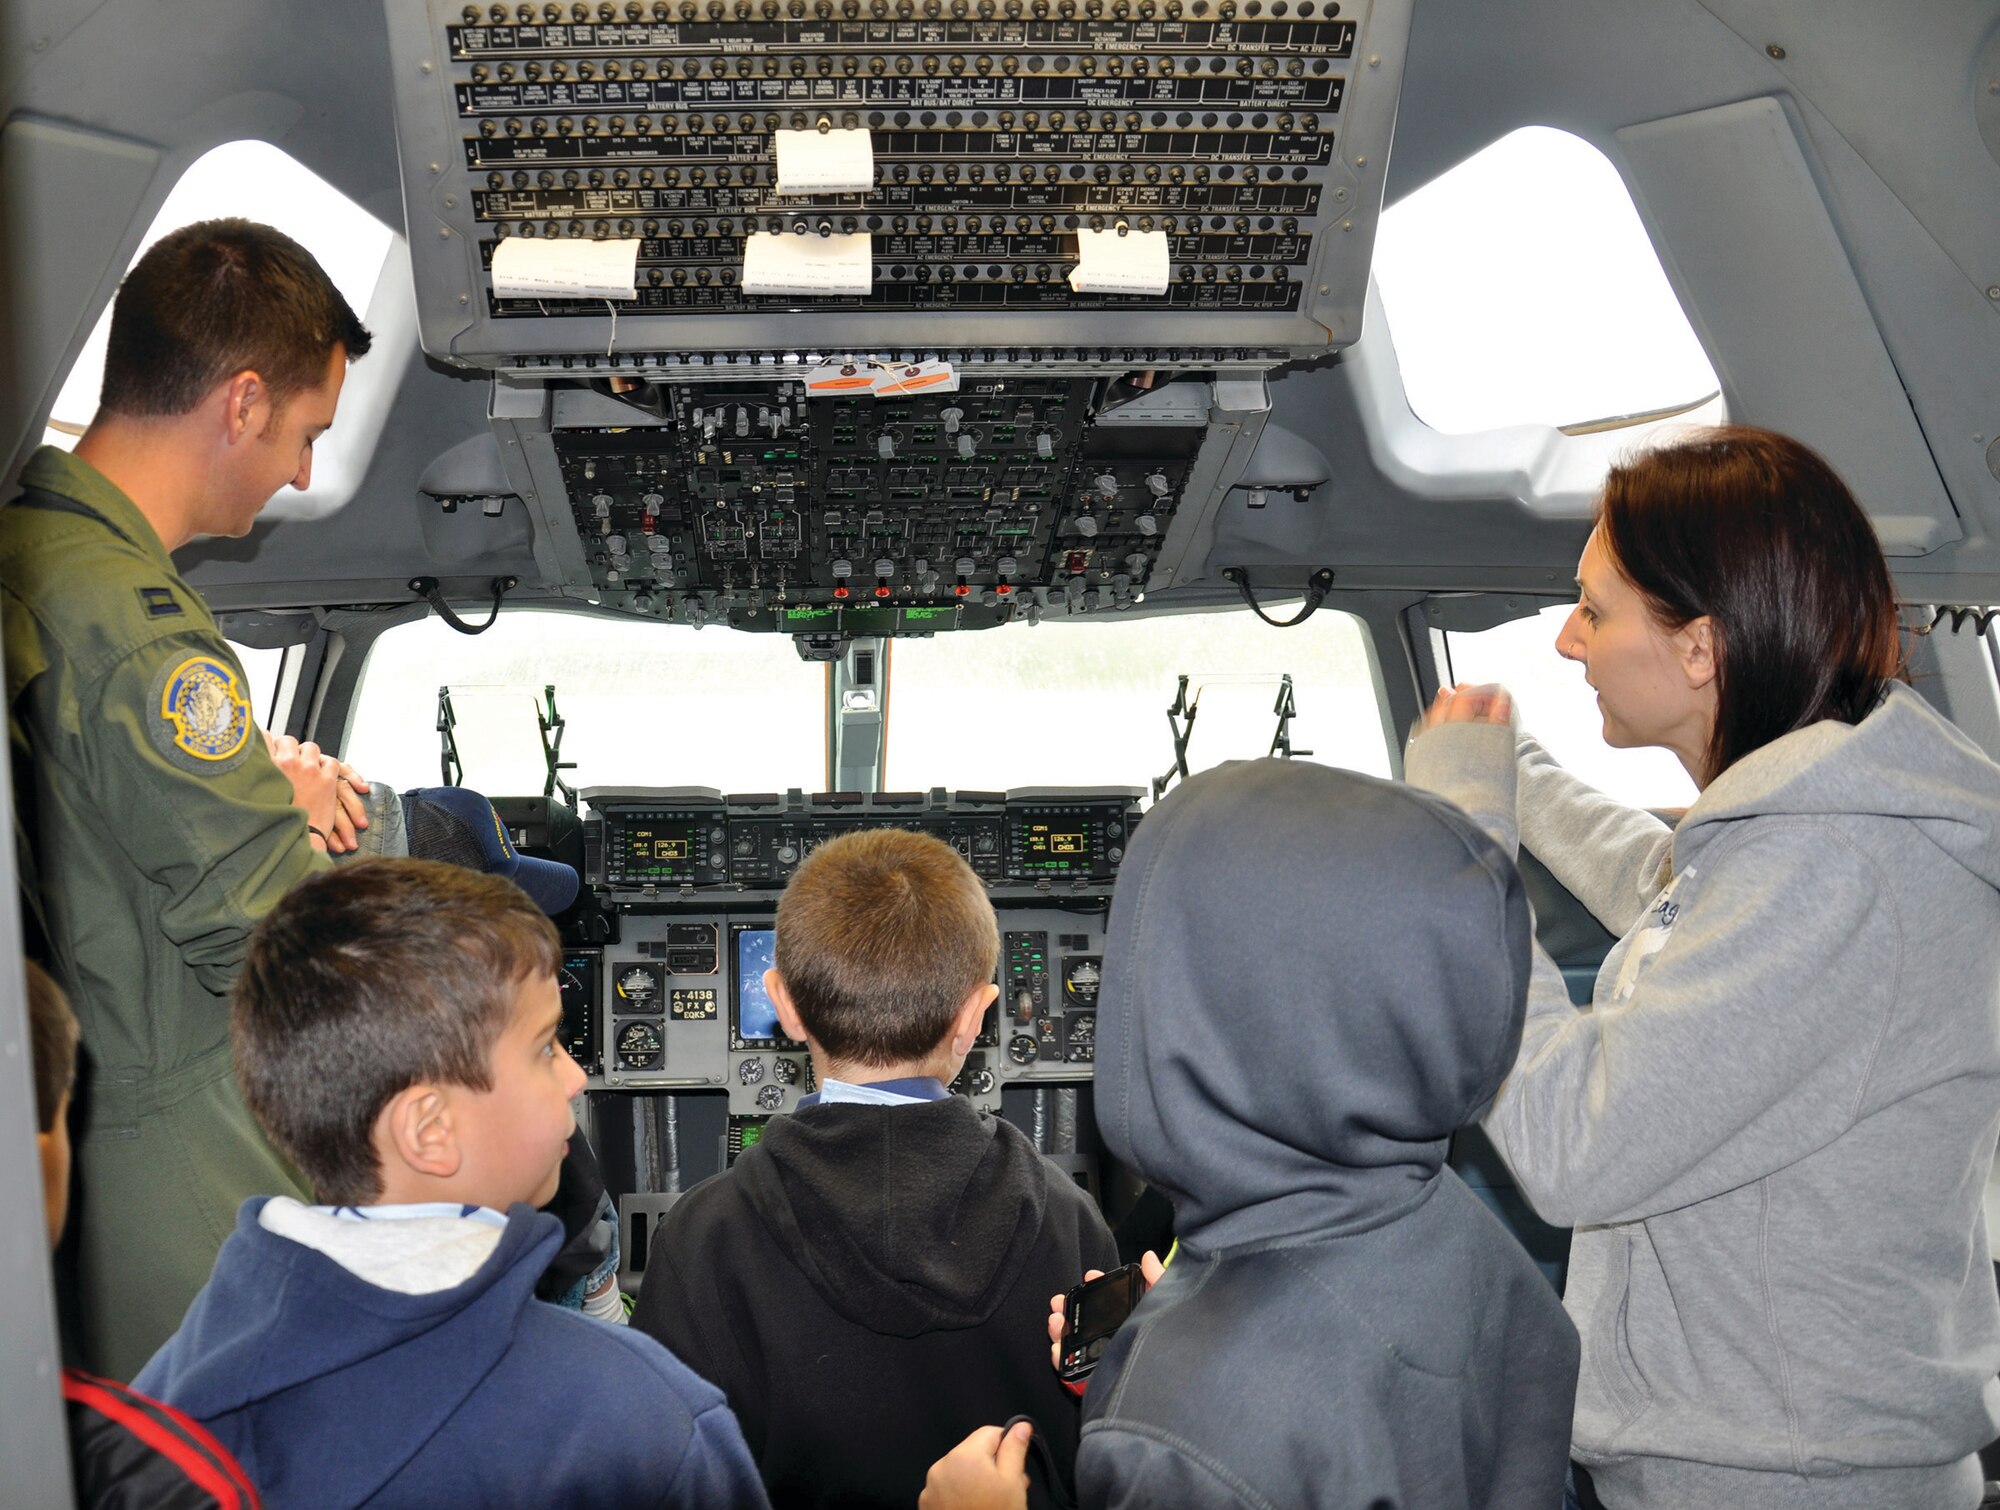 WRIGHT-PATTERSON AIR FORCE BASE, Ohio - Capt. Ryan Armstrong, 89th Airlift Squadron C-17 pilot shows a group of Scouts and their parents the flightdeck of a C-17 Globemaster III during the 445th Airlift Wing Scouts Day May 17. The 445th Airlift Wing hosted its annual Scouts Day May 17. More than 50 Boy and Cub Scouts from around the state enjoyed a morning of activities on the 445th flightline, to include a tour of a base fire truck, and demonstrations by both the 445th Security Forces Squadron and the 445th Aeromedical Evacuation Squadron. (U.S. Air Force photo/Lt. Col. Denise Kerr)